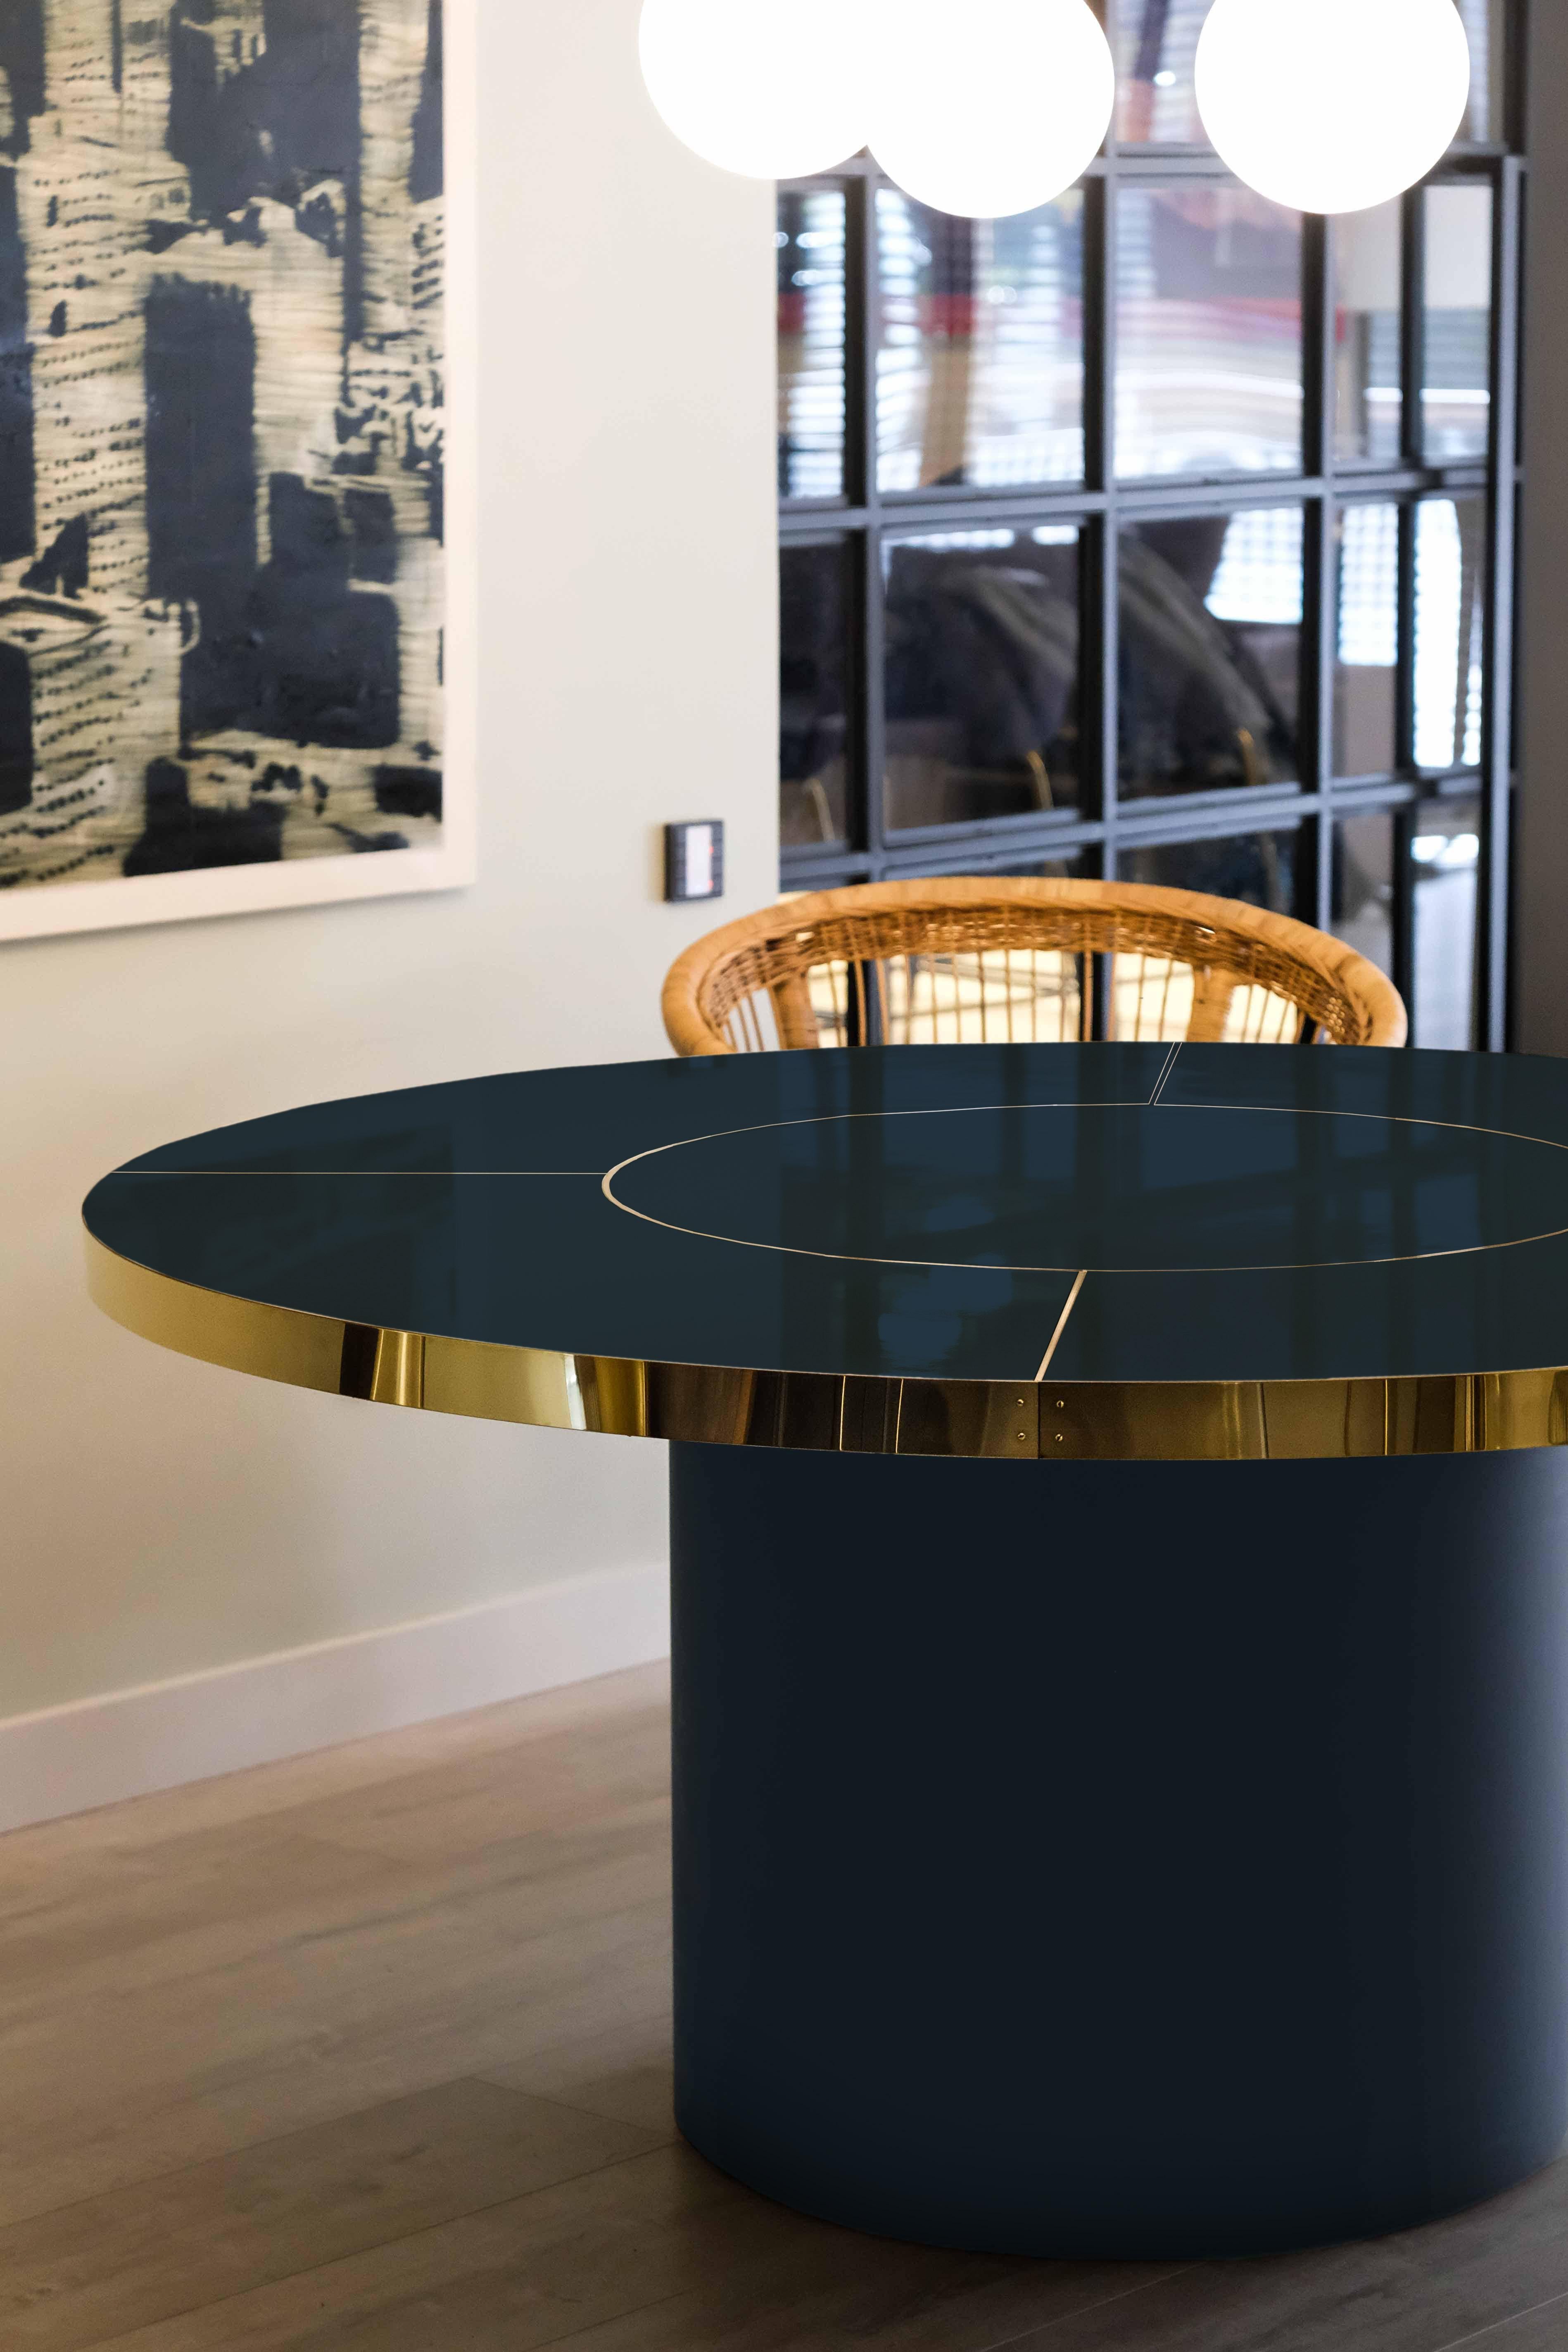 Retro Design Round Dining Table Palm Springs Style High GlossLaminated&Brass XXL For Sale 2